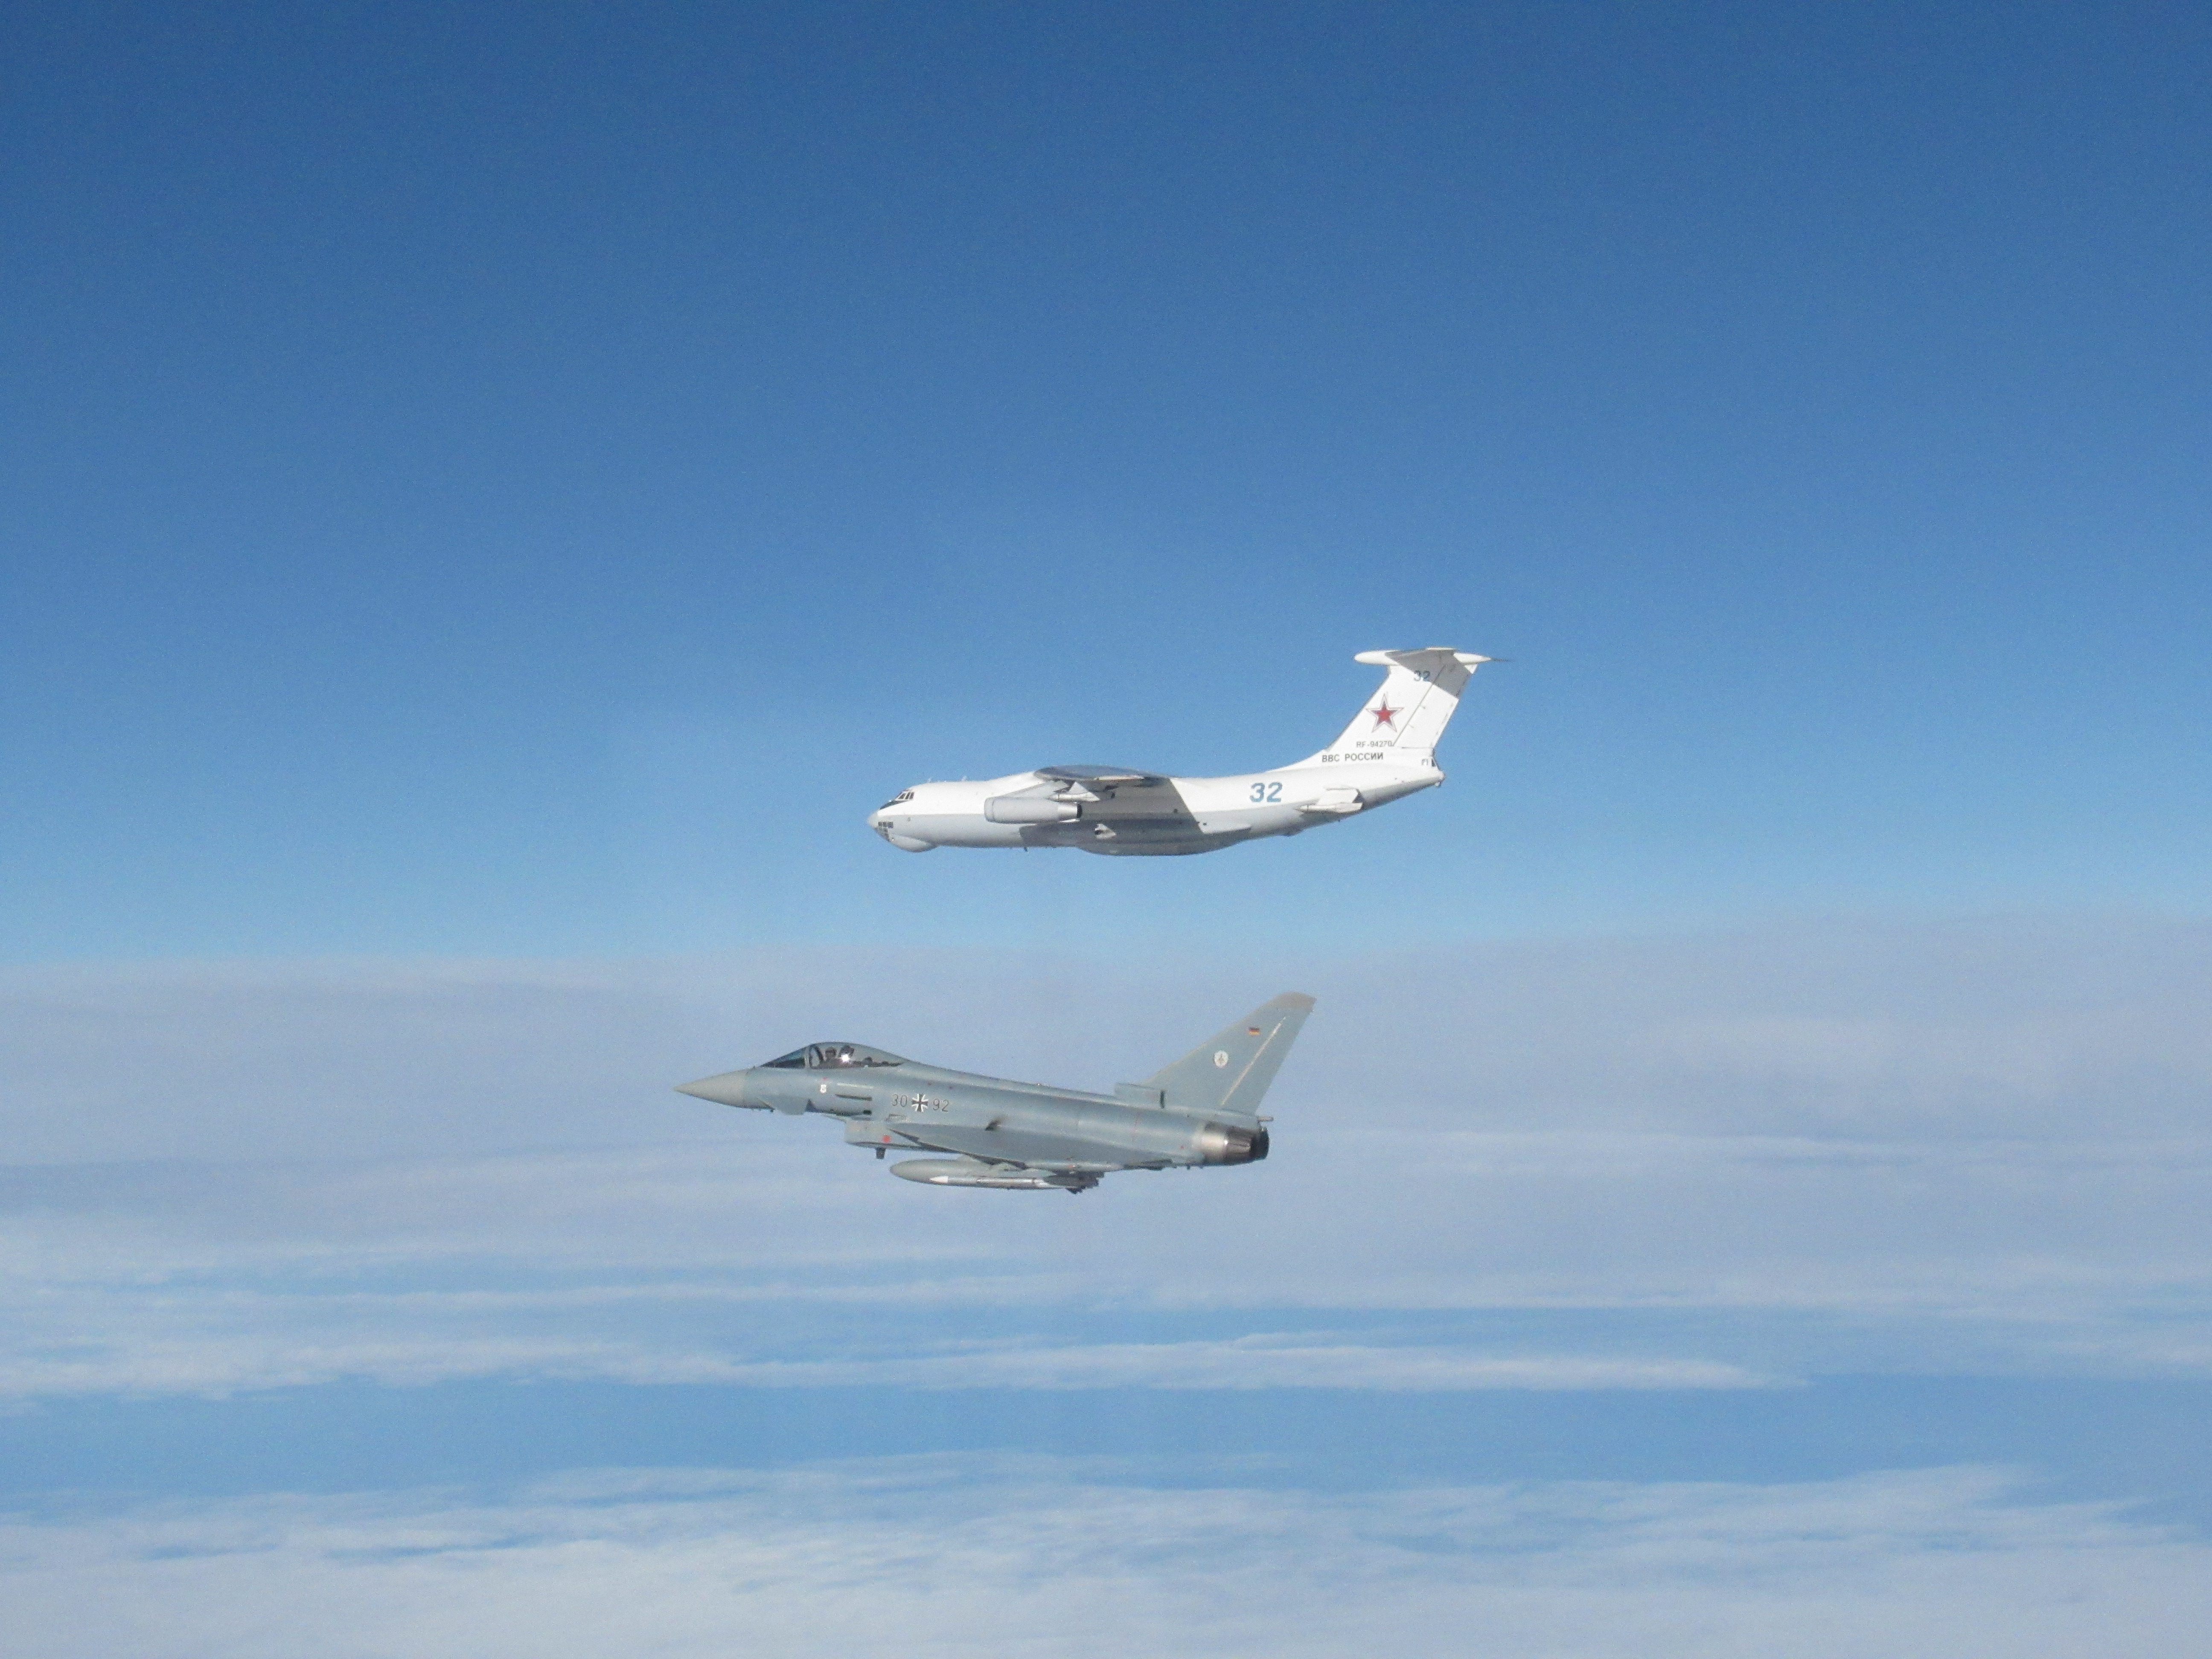 Images shows RAF Typhoon and Russian Ilyushin Il-78 Midas aircraft in flight above clouds.